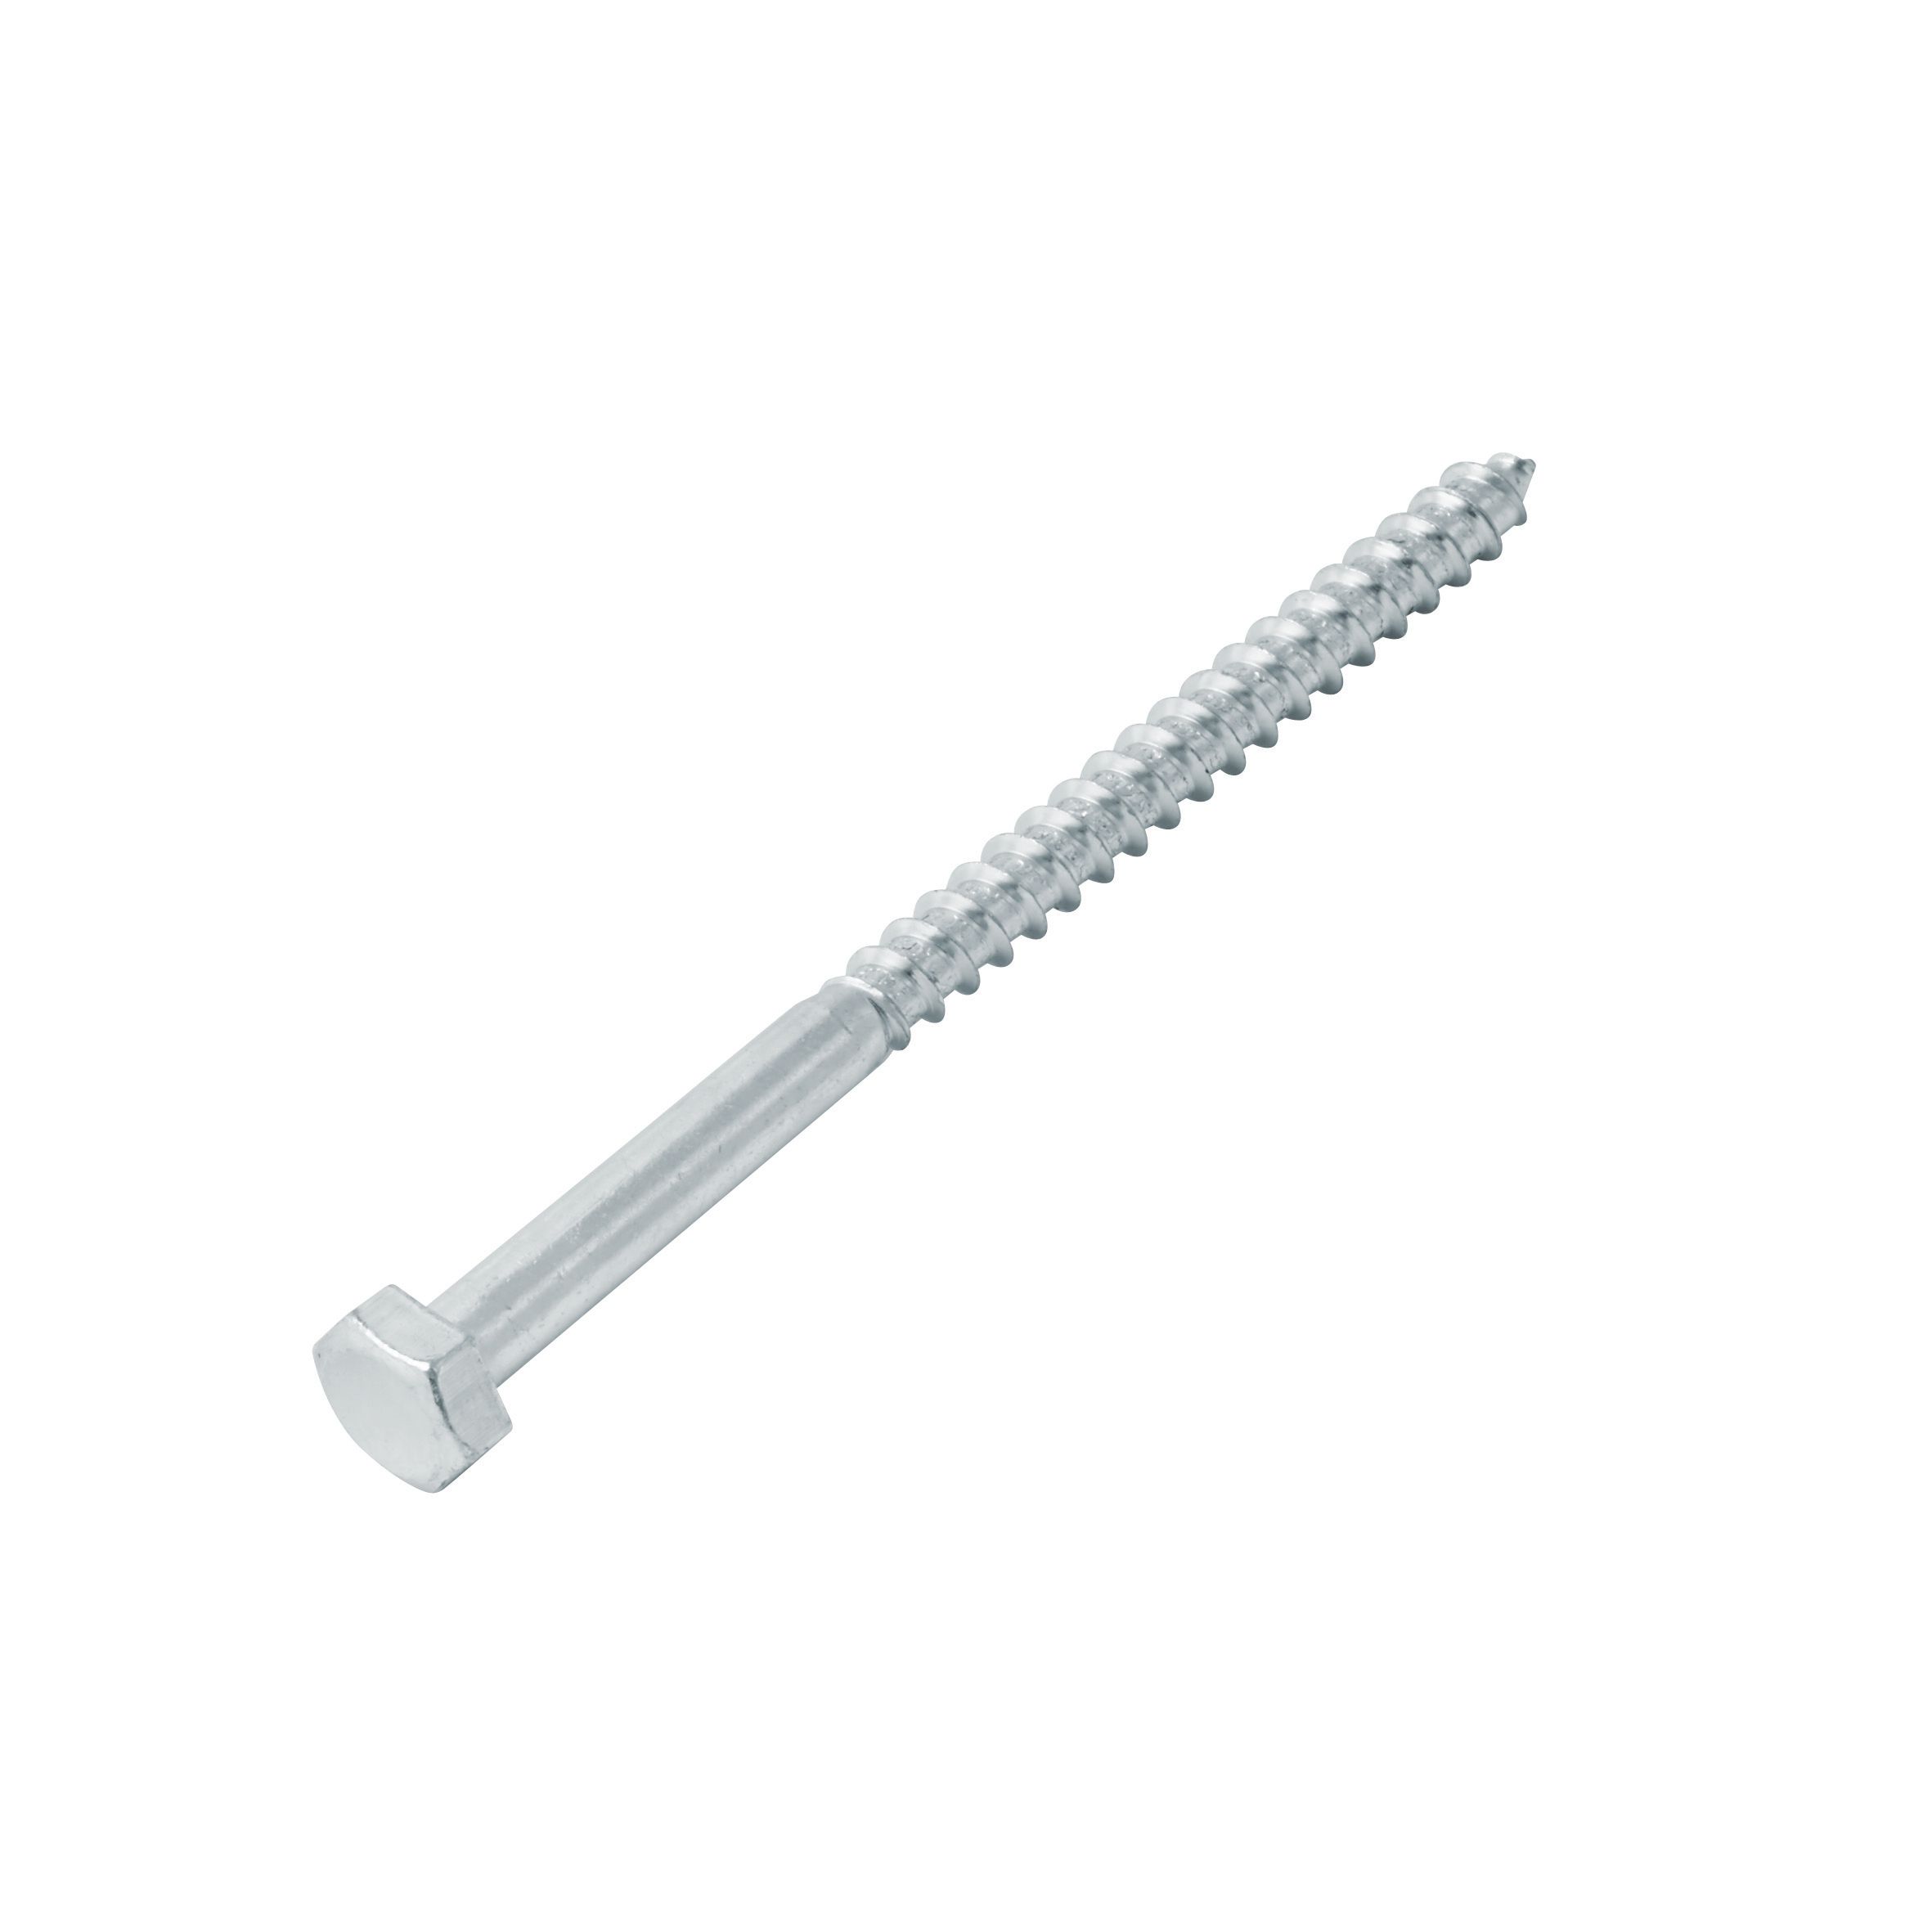 Image of Wickes Coach Screws - M8 x 50mm Pack of 10